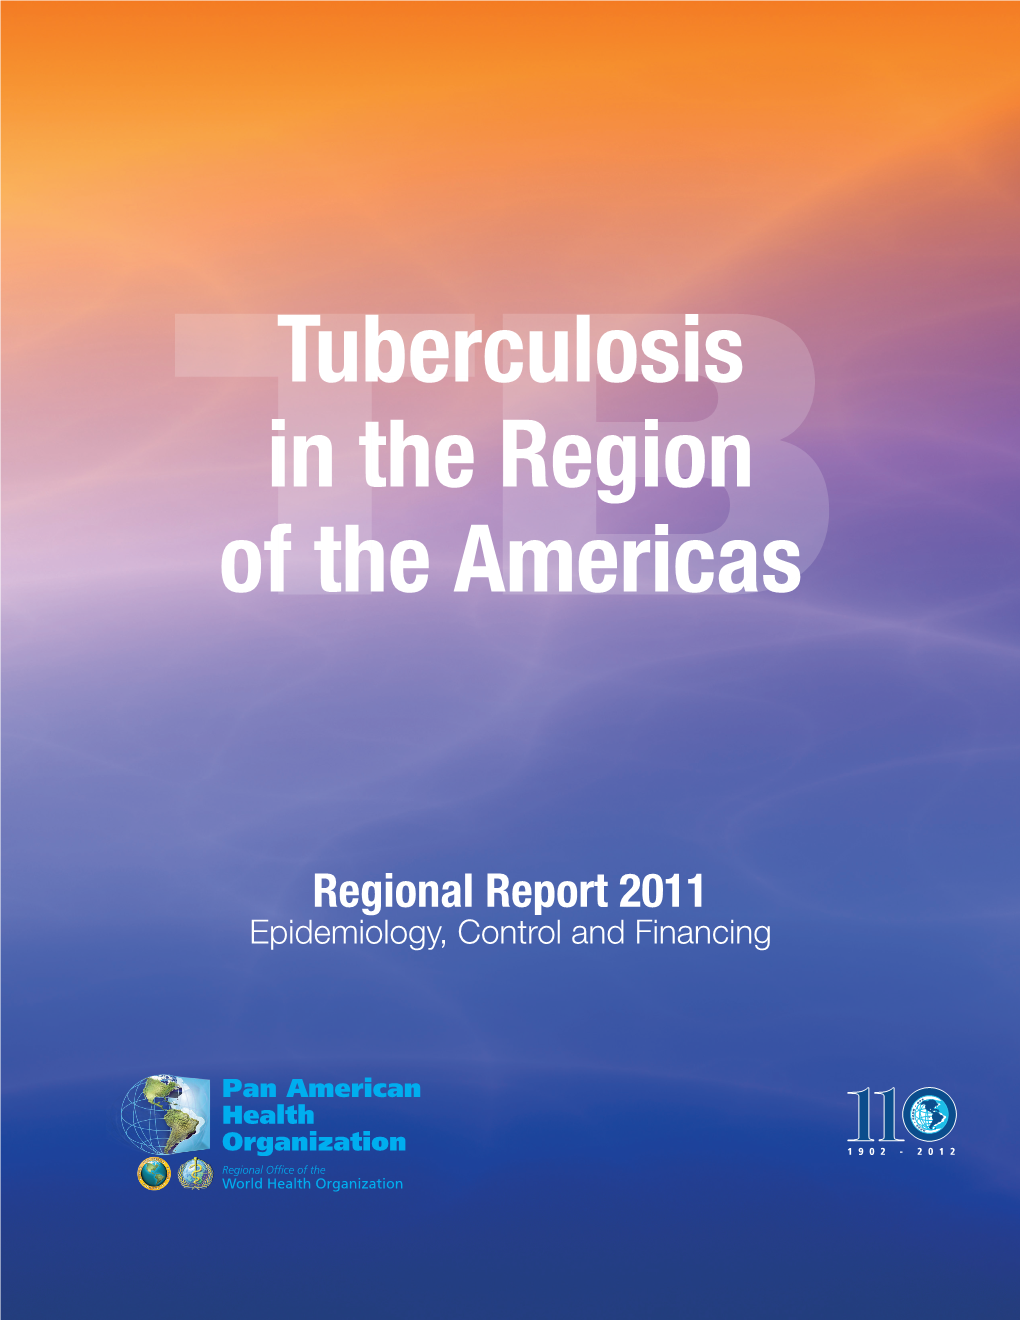 Tuberculosis in the Region of the Americas